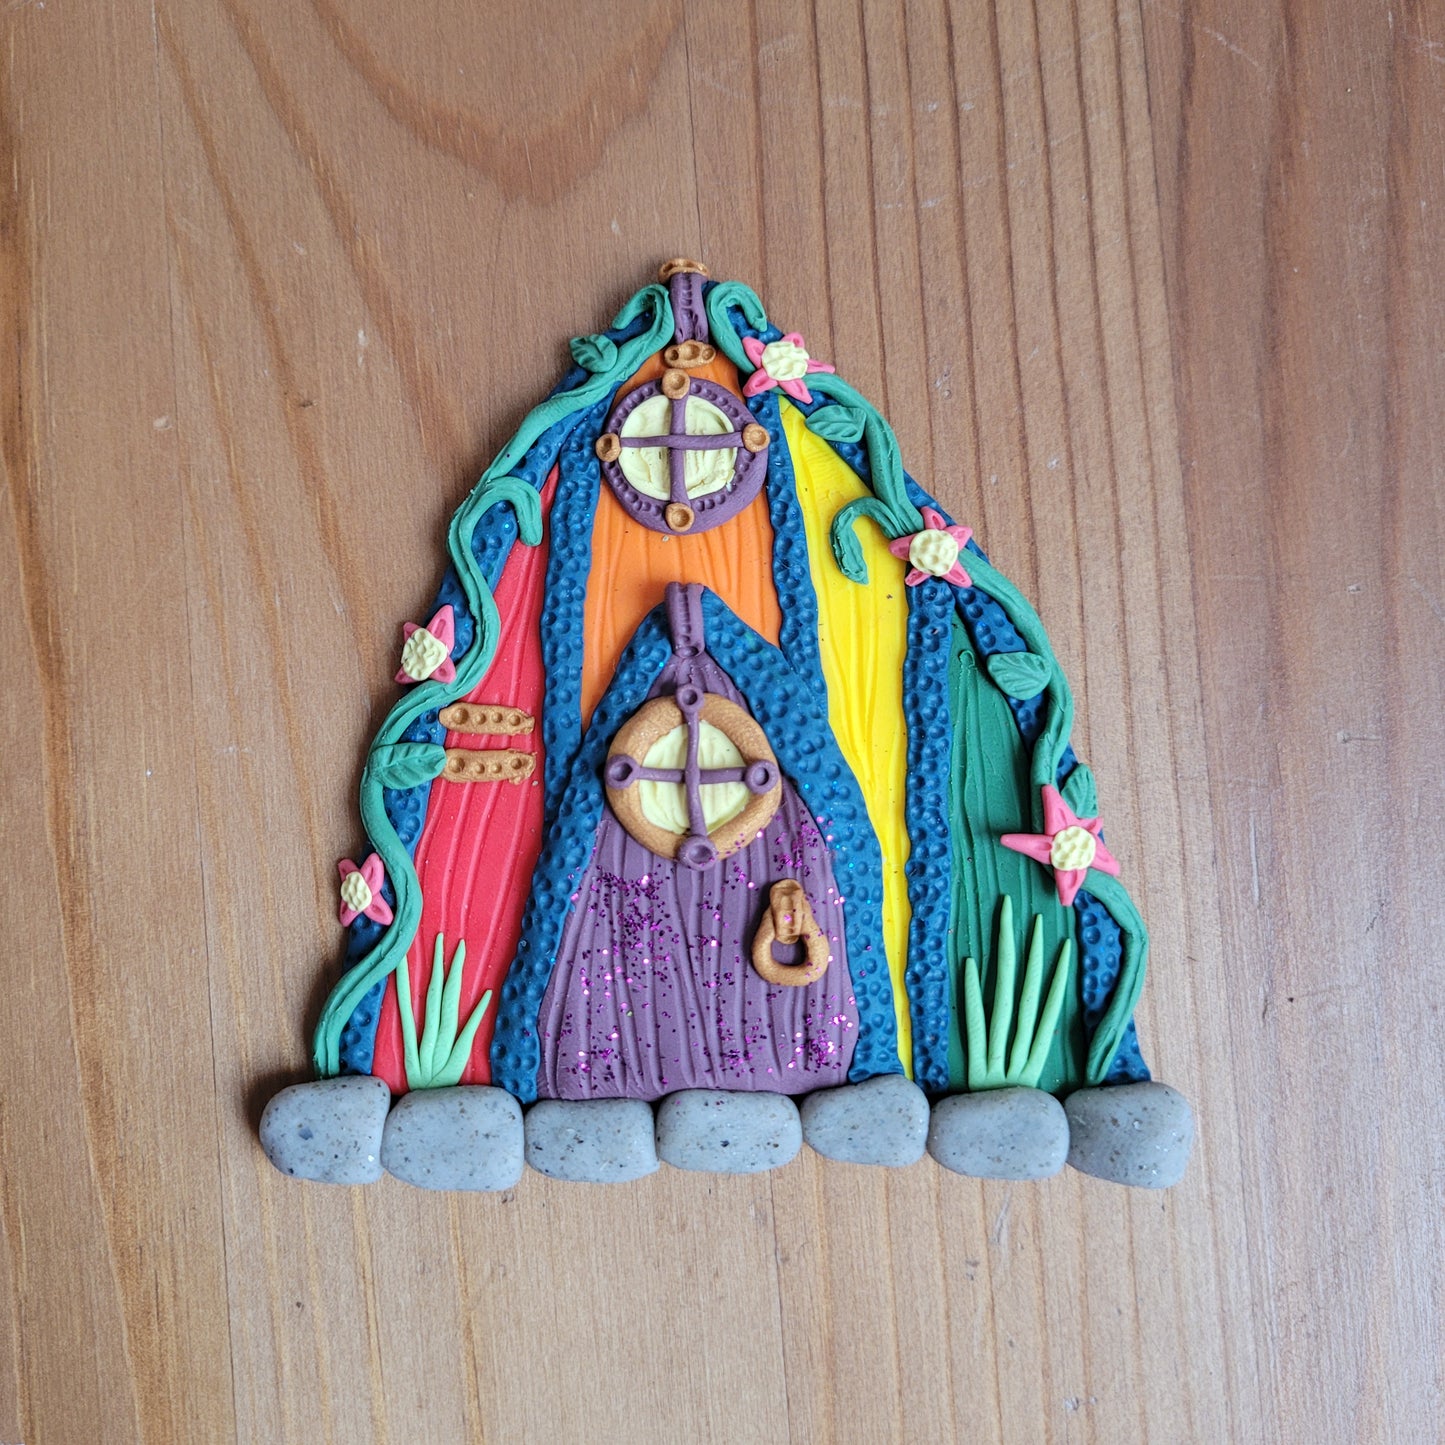 The Pride fairy door is rainbow colored and rests on a wooden background.